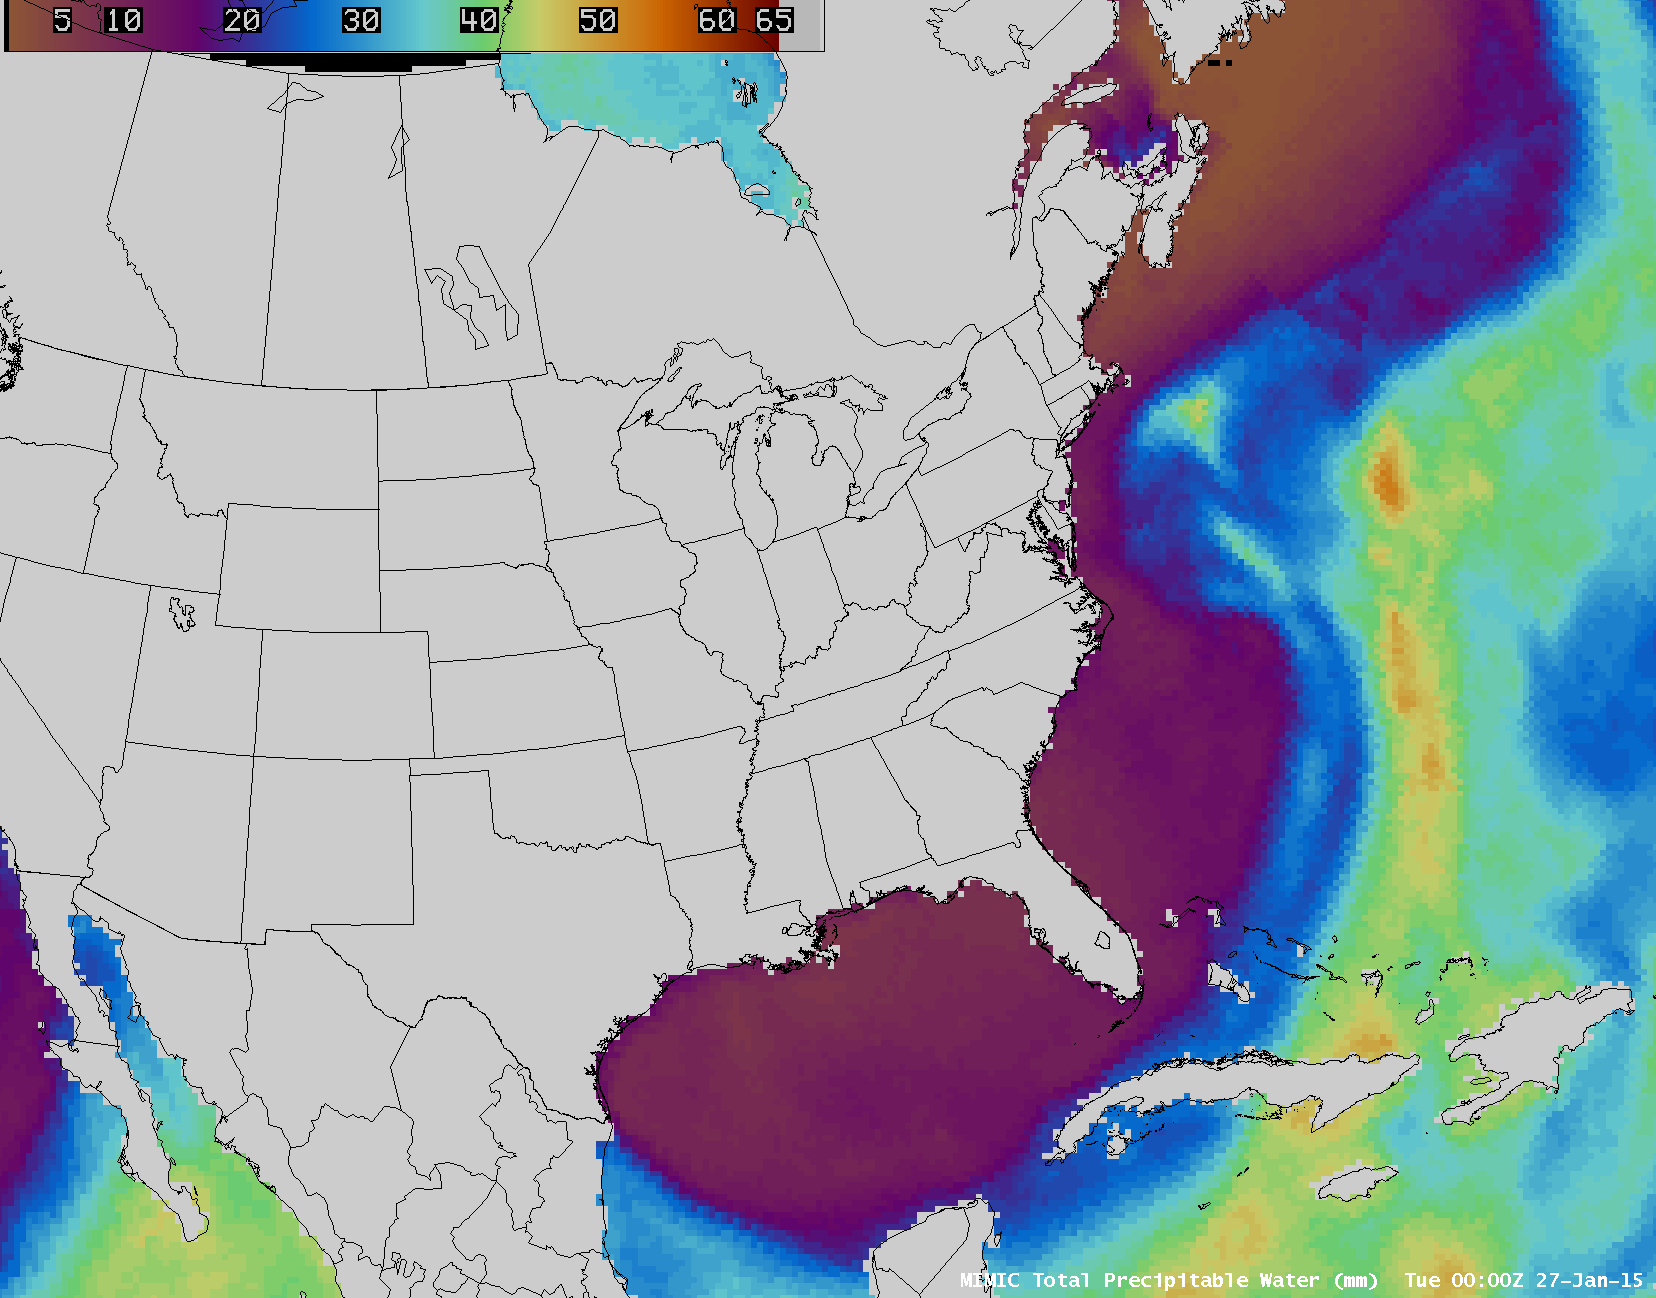 MIMIC total Precipitable Water (click to play animation)